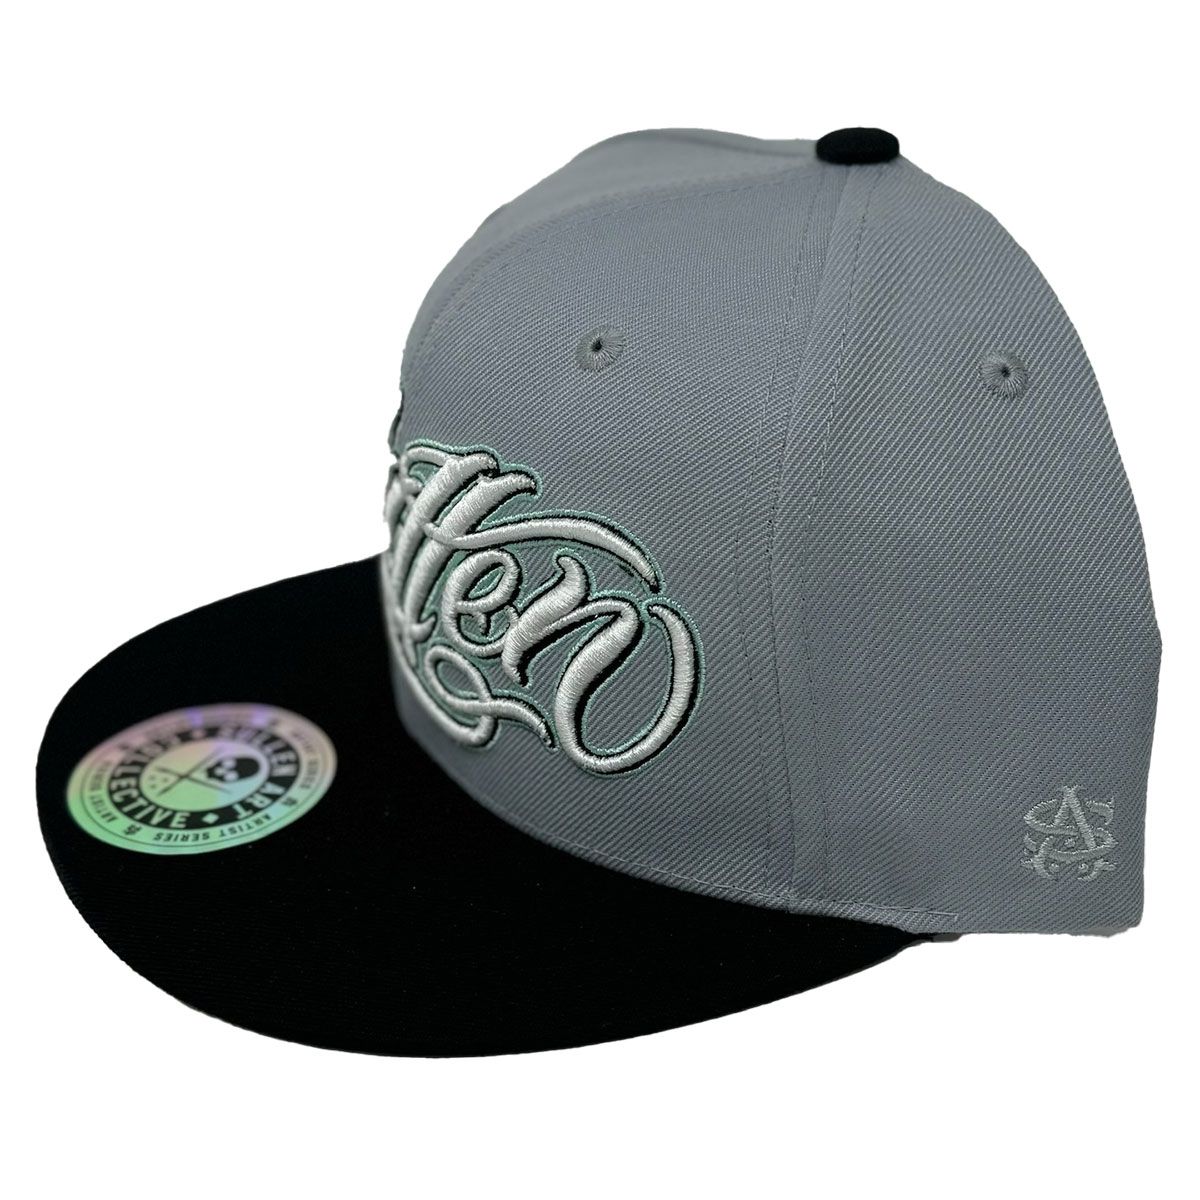 SULLEN ART COLLECTIVE BUTTERY SNAPBACK - HAT - Synik Clothing - synikclothing.com